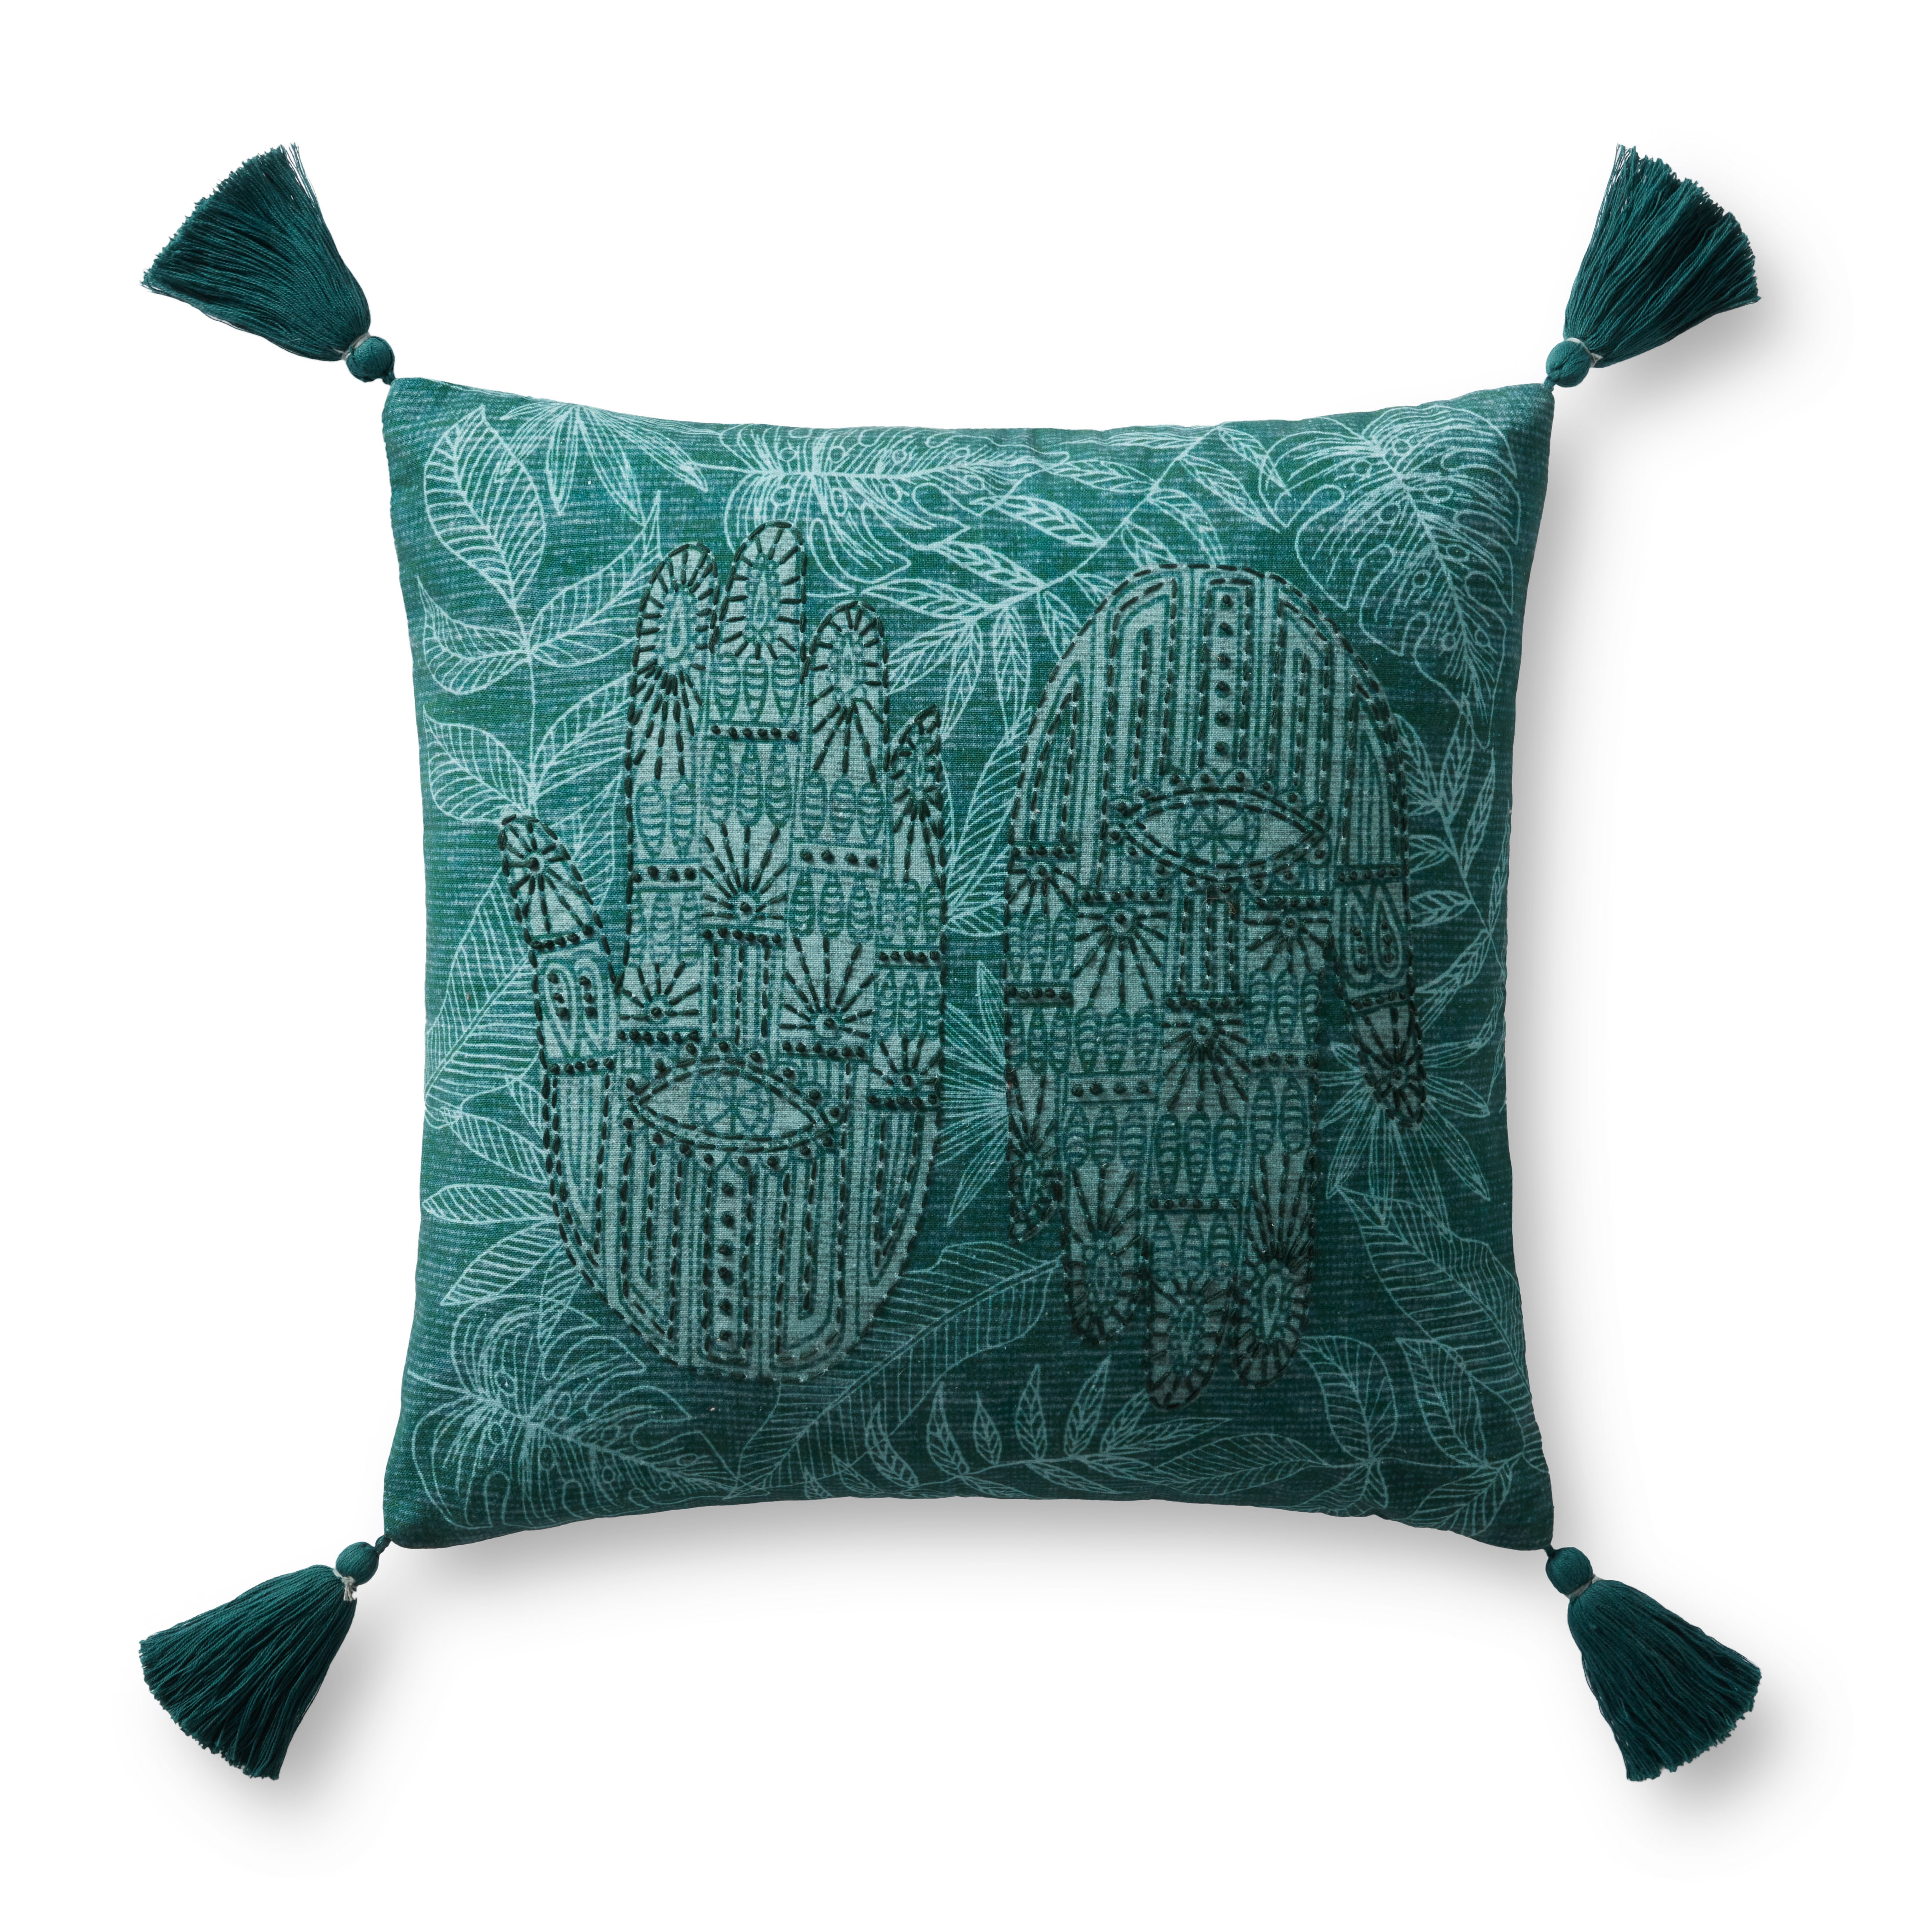 PILLOWS P0956 GREEN 18" x 18" Cover w/Poly - Justina Blakeney x Loloi Rugs